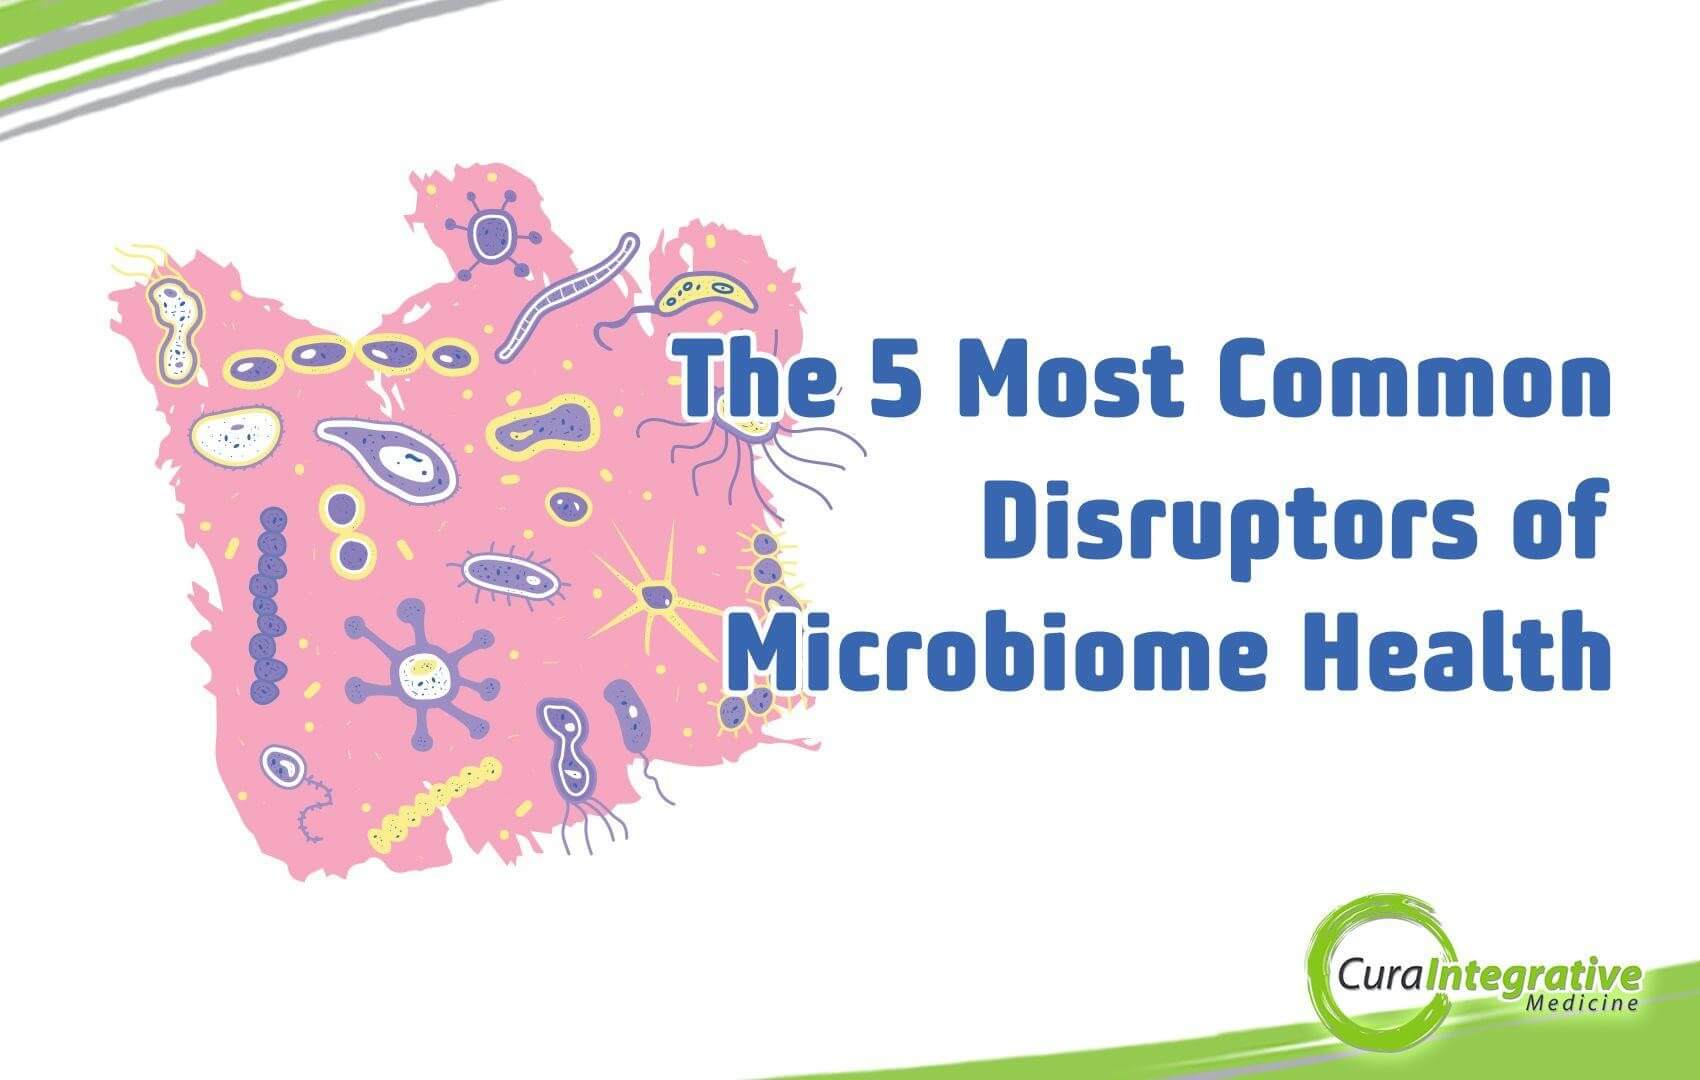 The 5 Most Common Disruptors of Microbiome Health